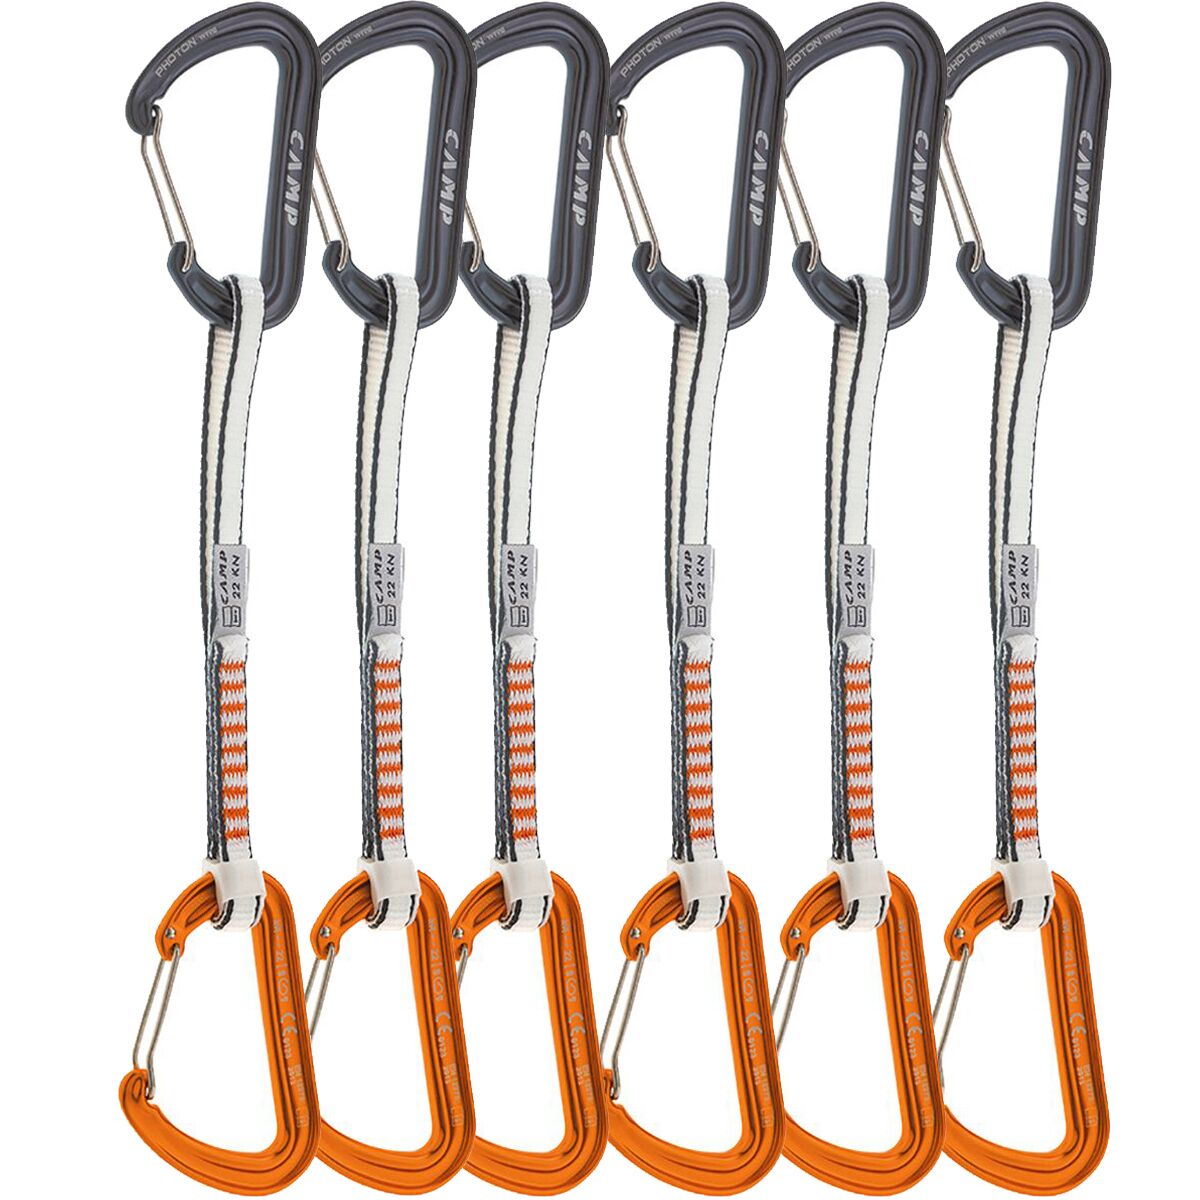 CAMP USA Photon Wire Express KS Dyneema Quickdraw - 6-Pack